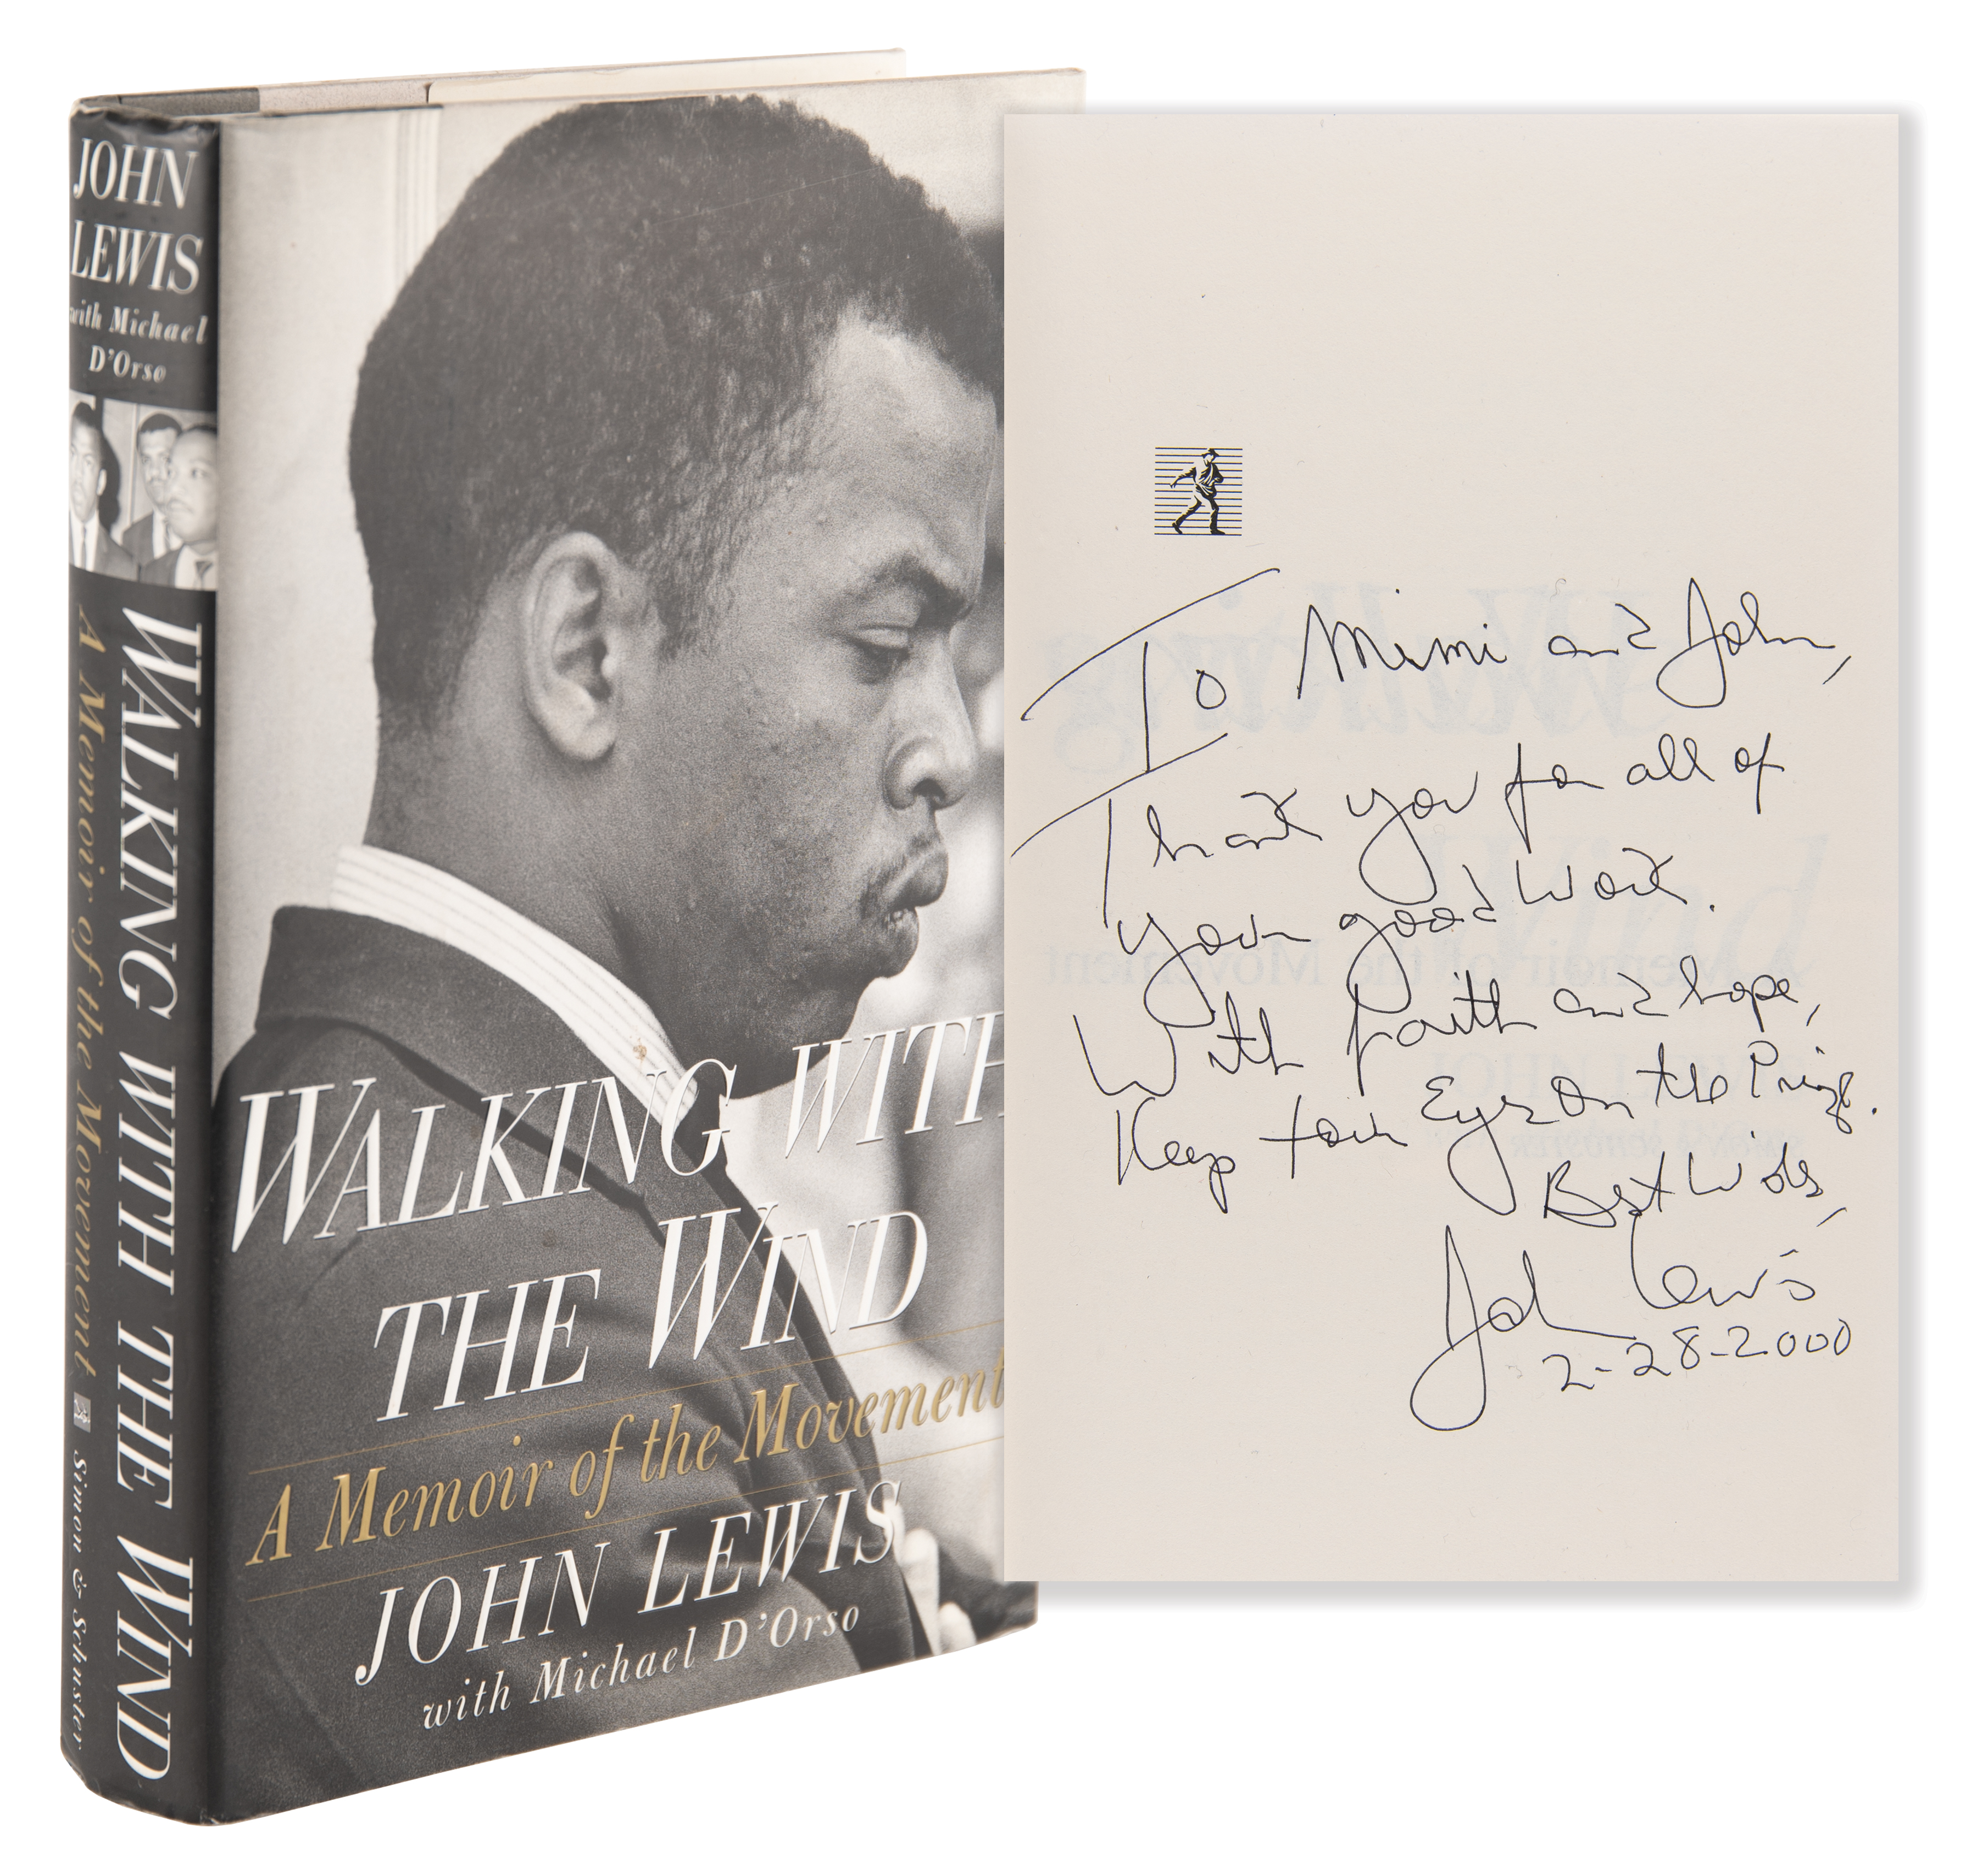 Lot #371 John Lewis Signed Book - Walking With the Wind - Image 1